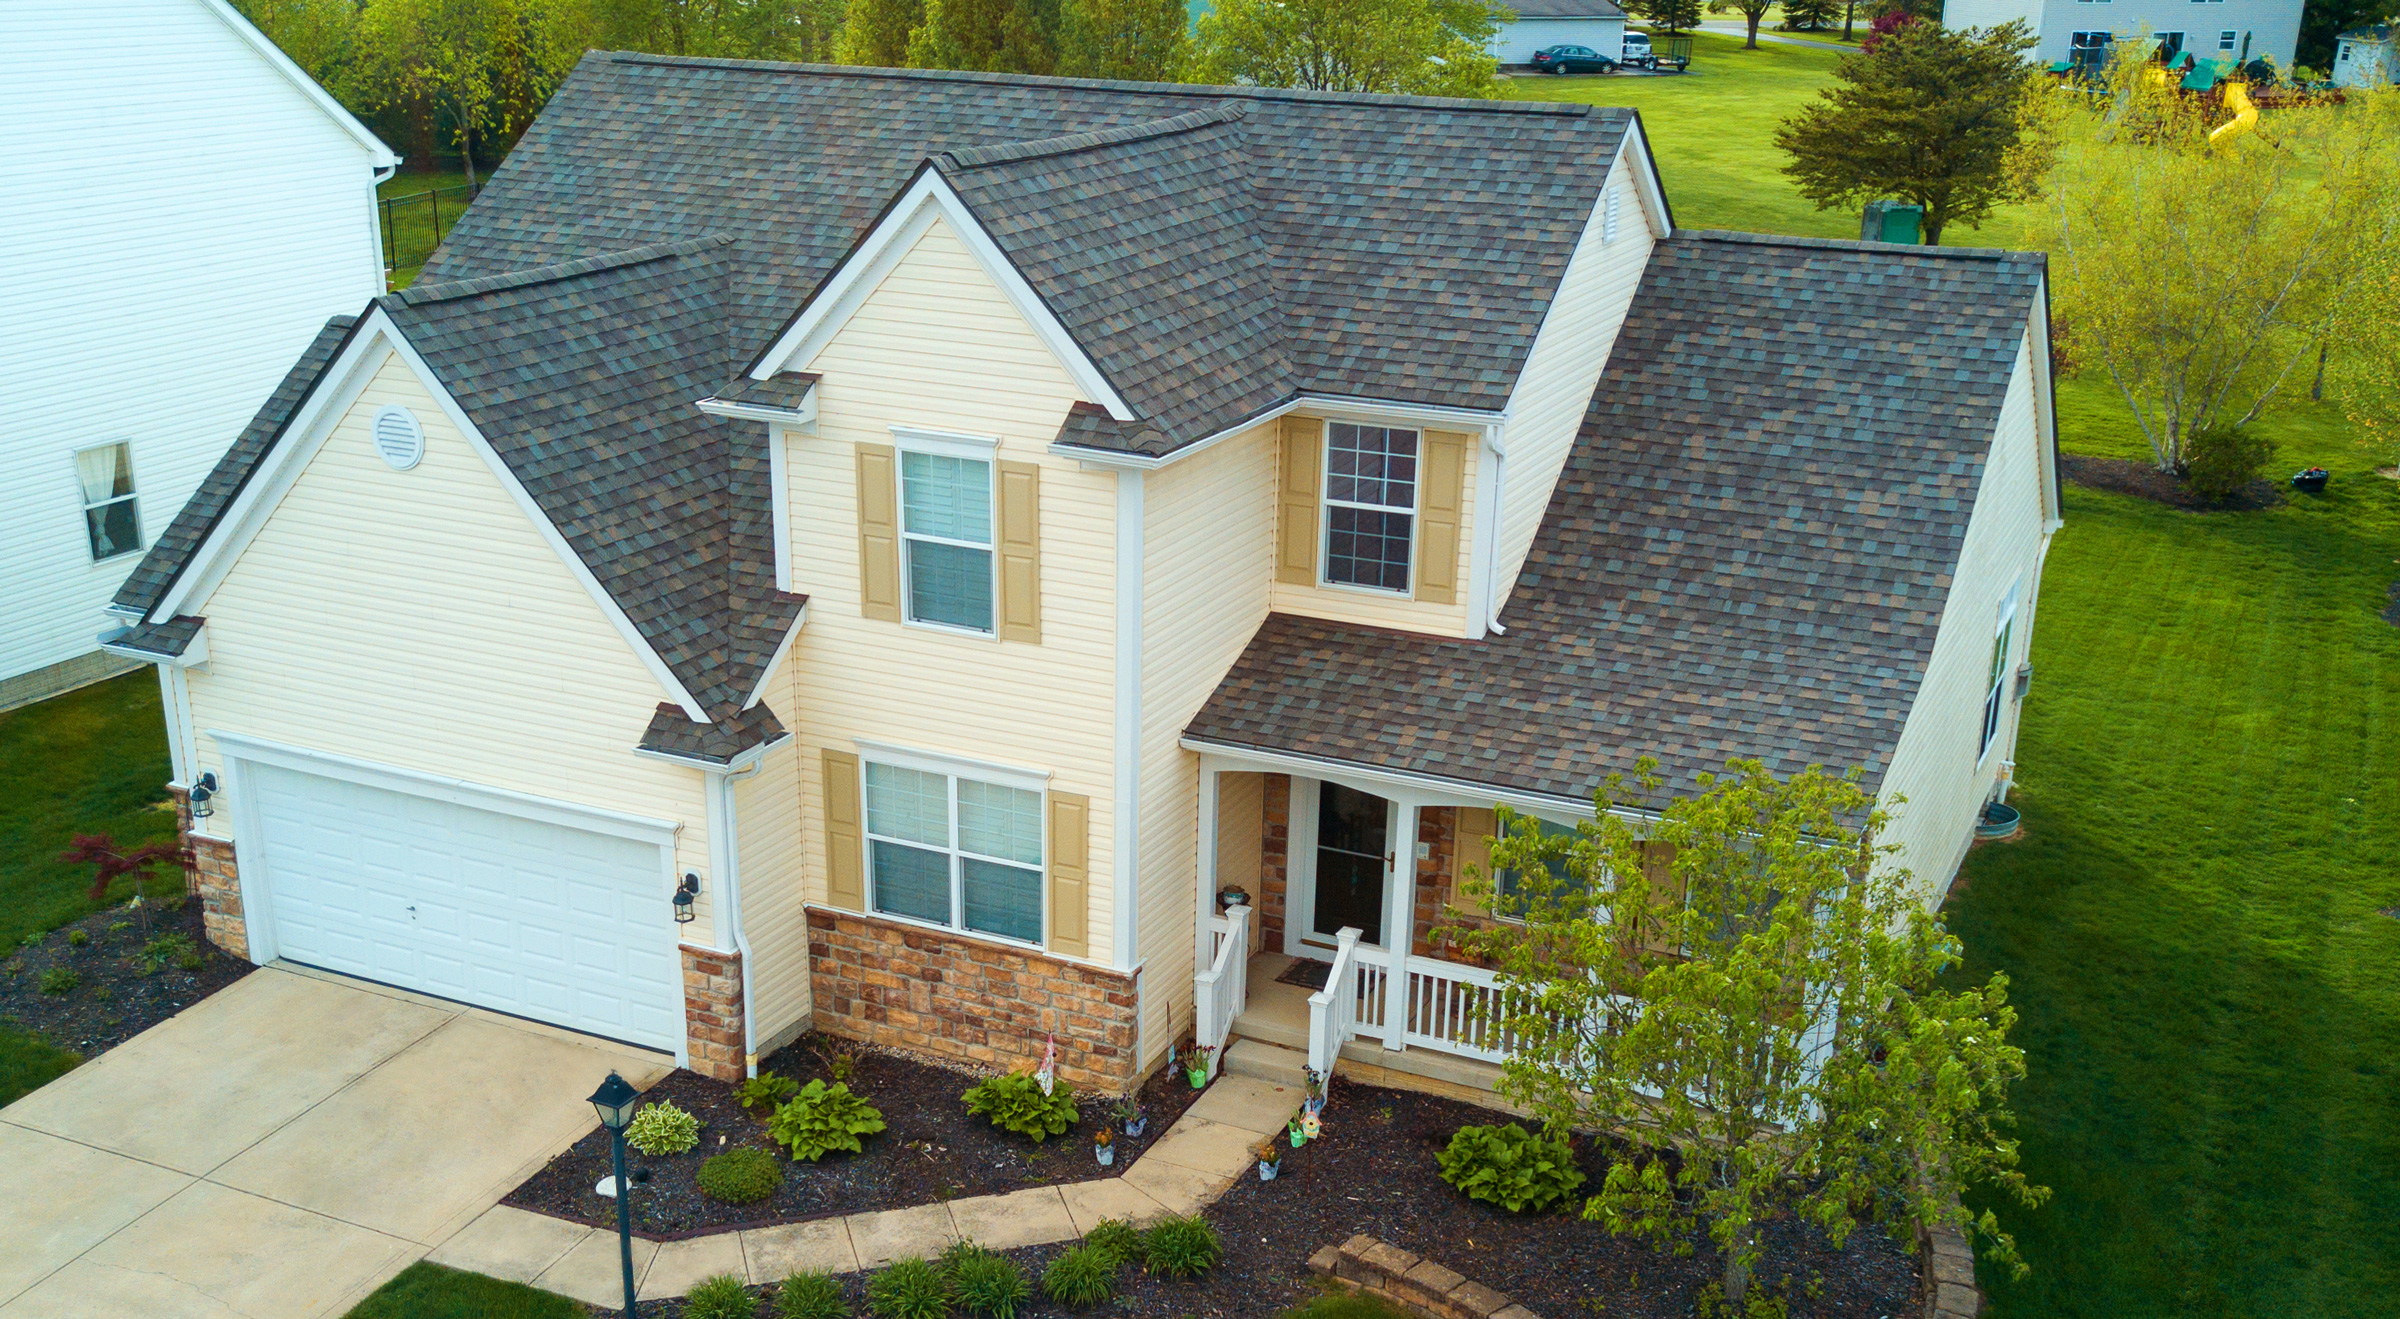 Our Services - Roofing, Siding, Windows, Gutters, Masonry, and Insulation